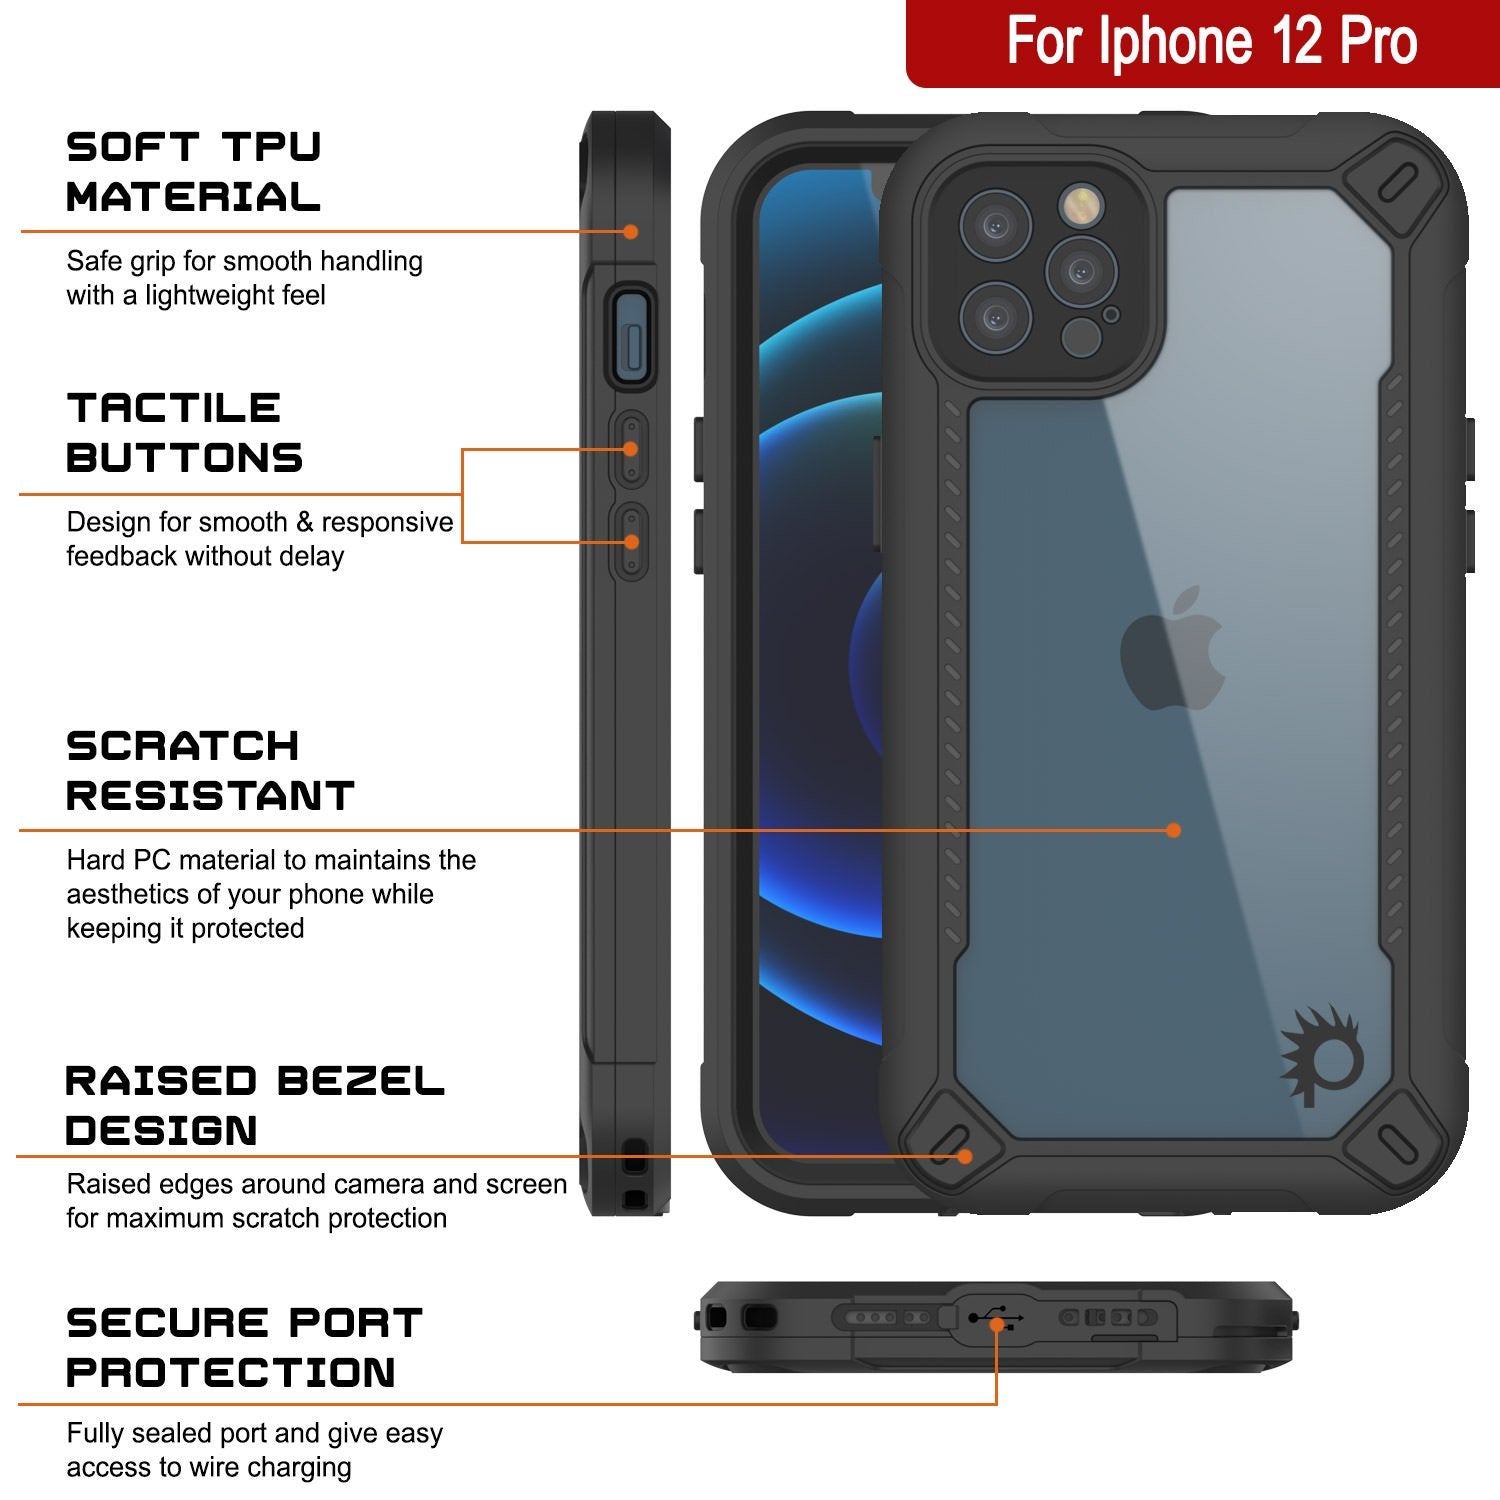 iPhone 12 Pro Waterproof IP68 Case, Punkcase [Black]  [Maximus Series] [Slim Fit] [IP68 Certified] [Shockresistant] Clear Armor Cover with Screen Protector | Ultimate Protection